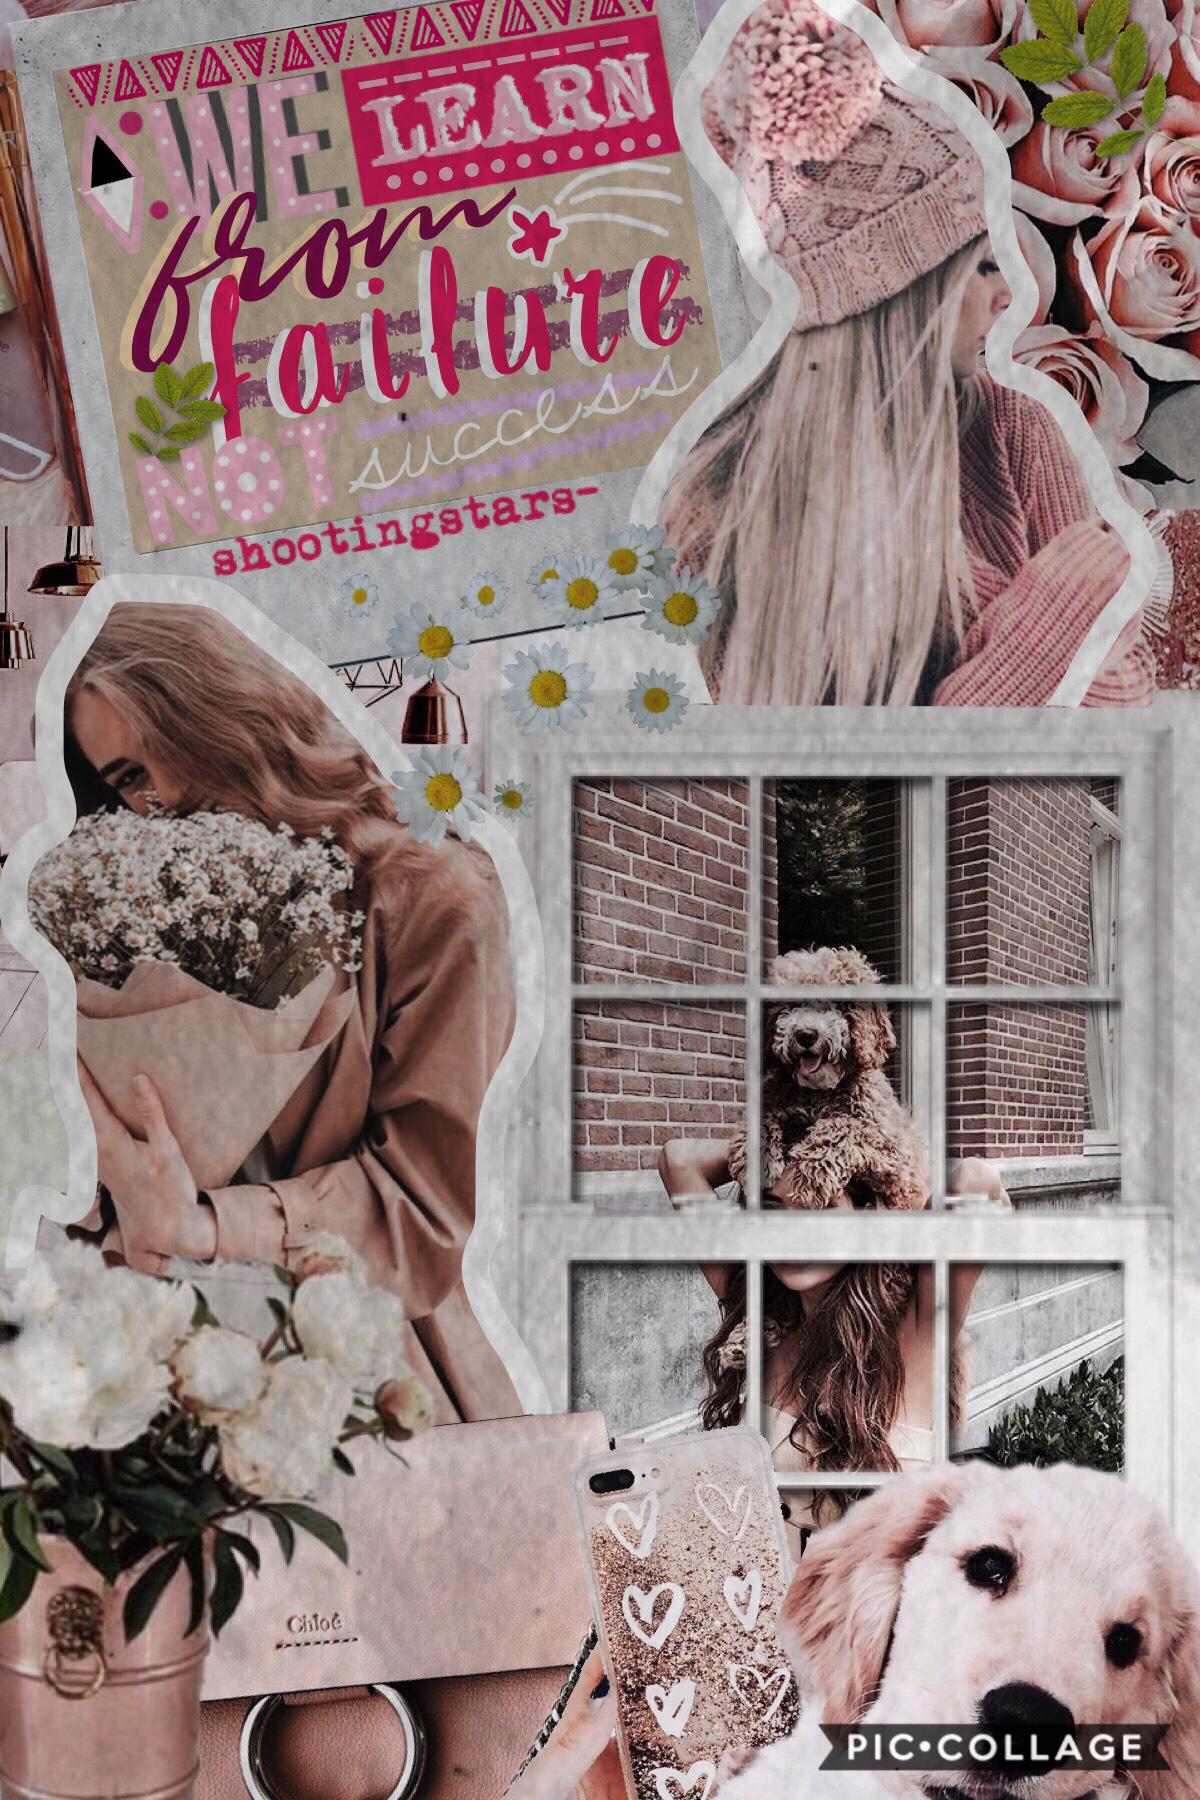 heyo, this is a collage that I made a while ago🌸💓what should I do for 2.5k?🌼✨💫how are y’all doing?🌿🌻i might be a little inactive because I’ll be at camp for the next week🌺🍃also anyone wanna collab? have a great day y’all